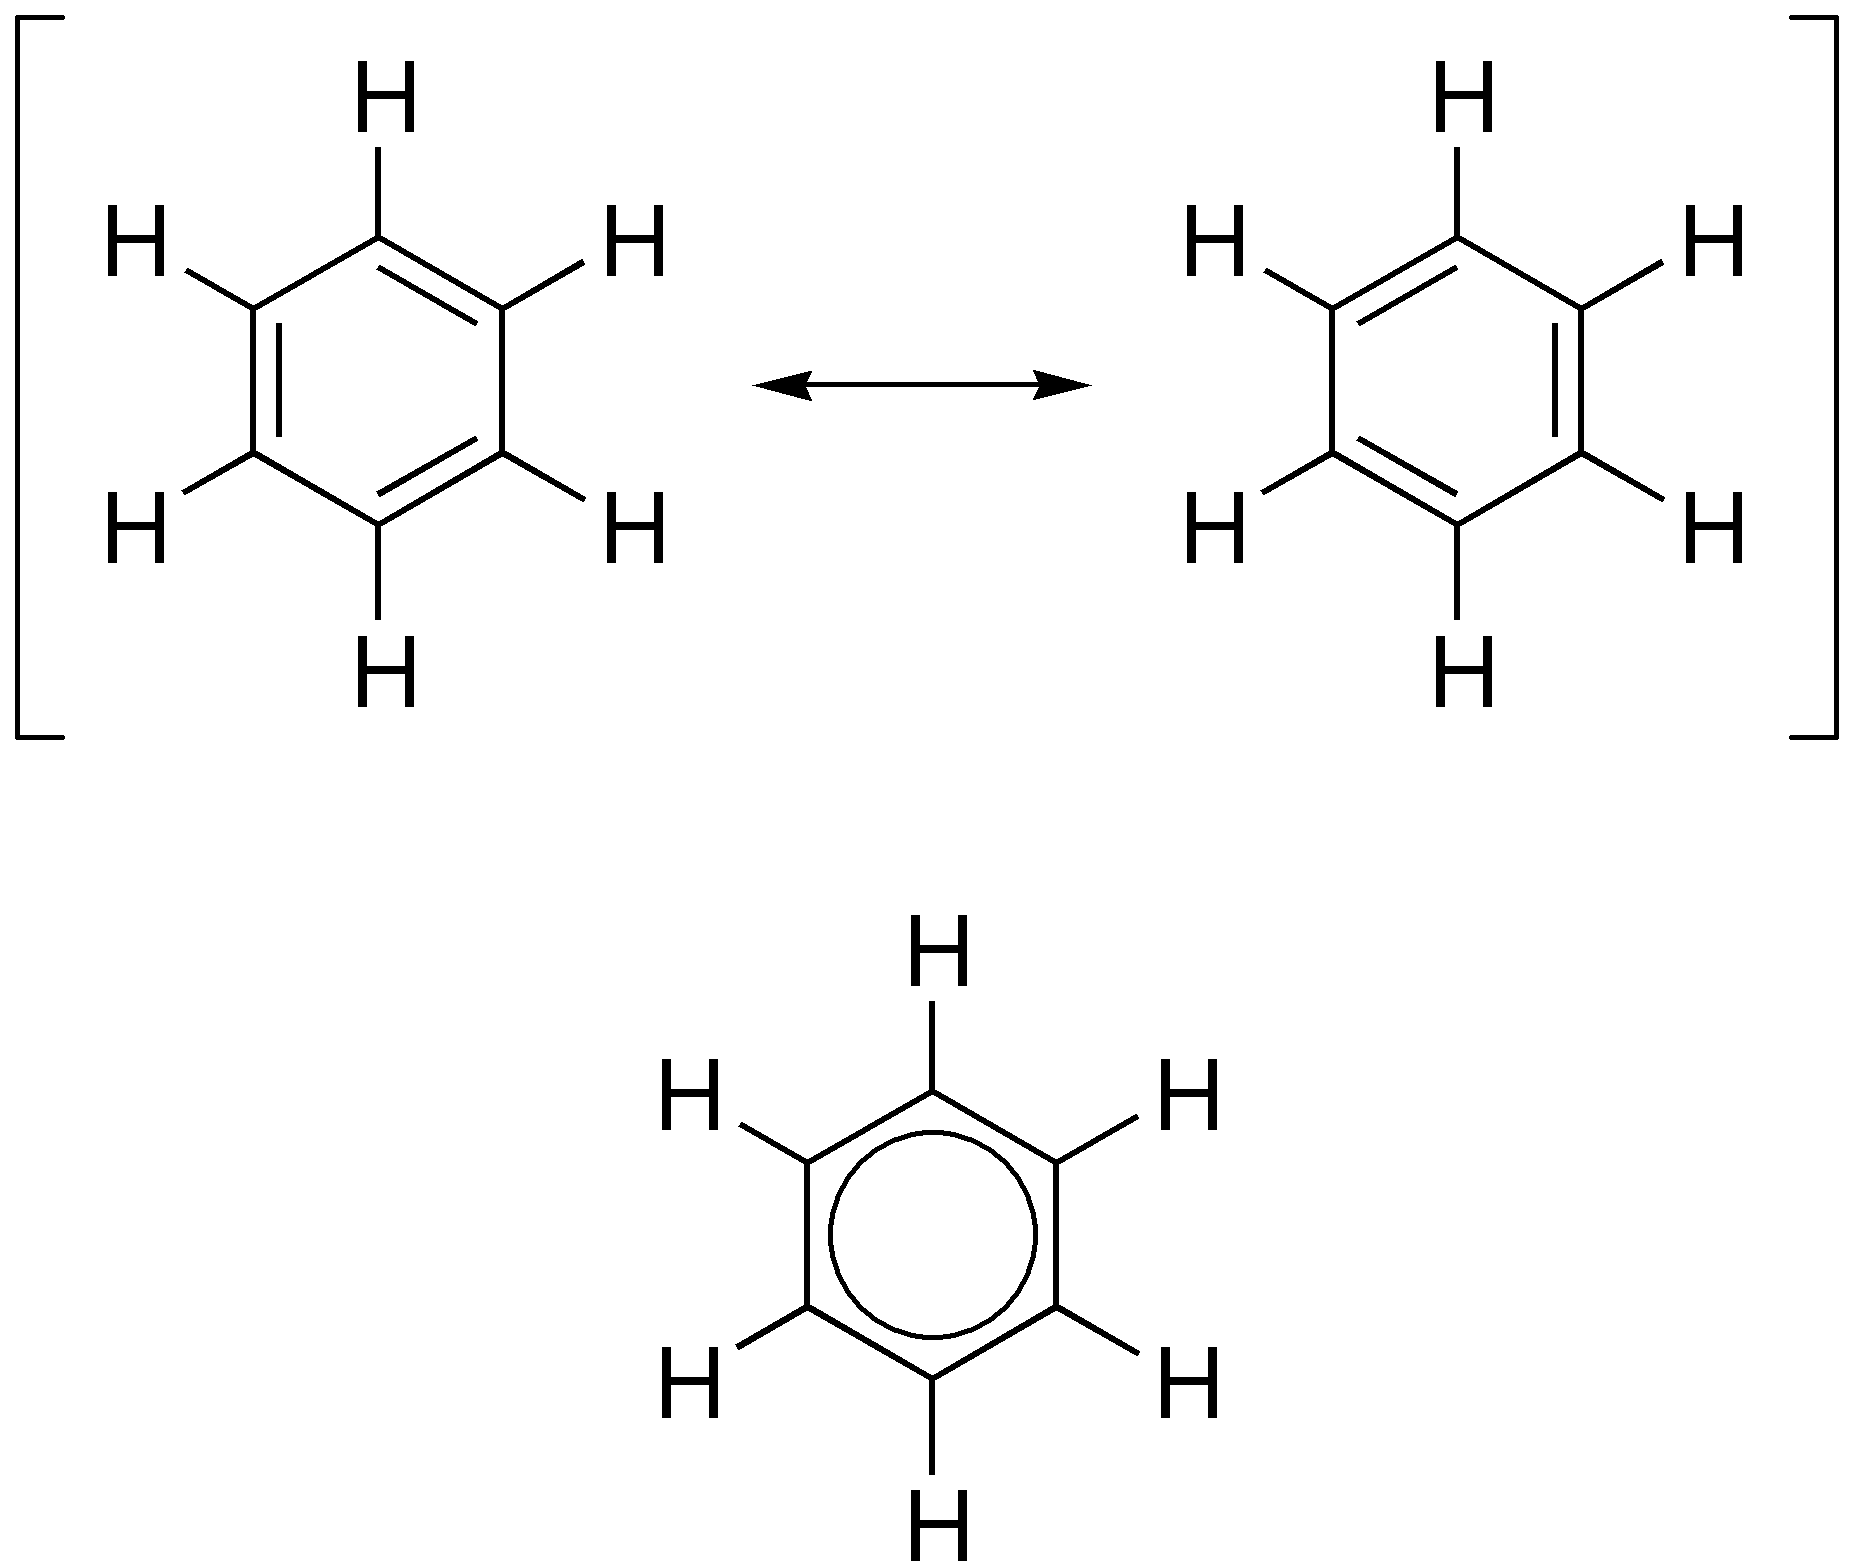 Benzene_resonance_structures.png